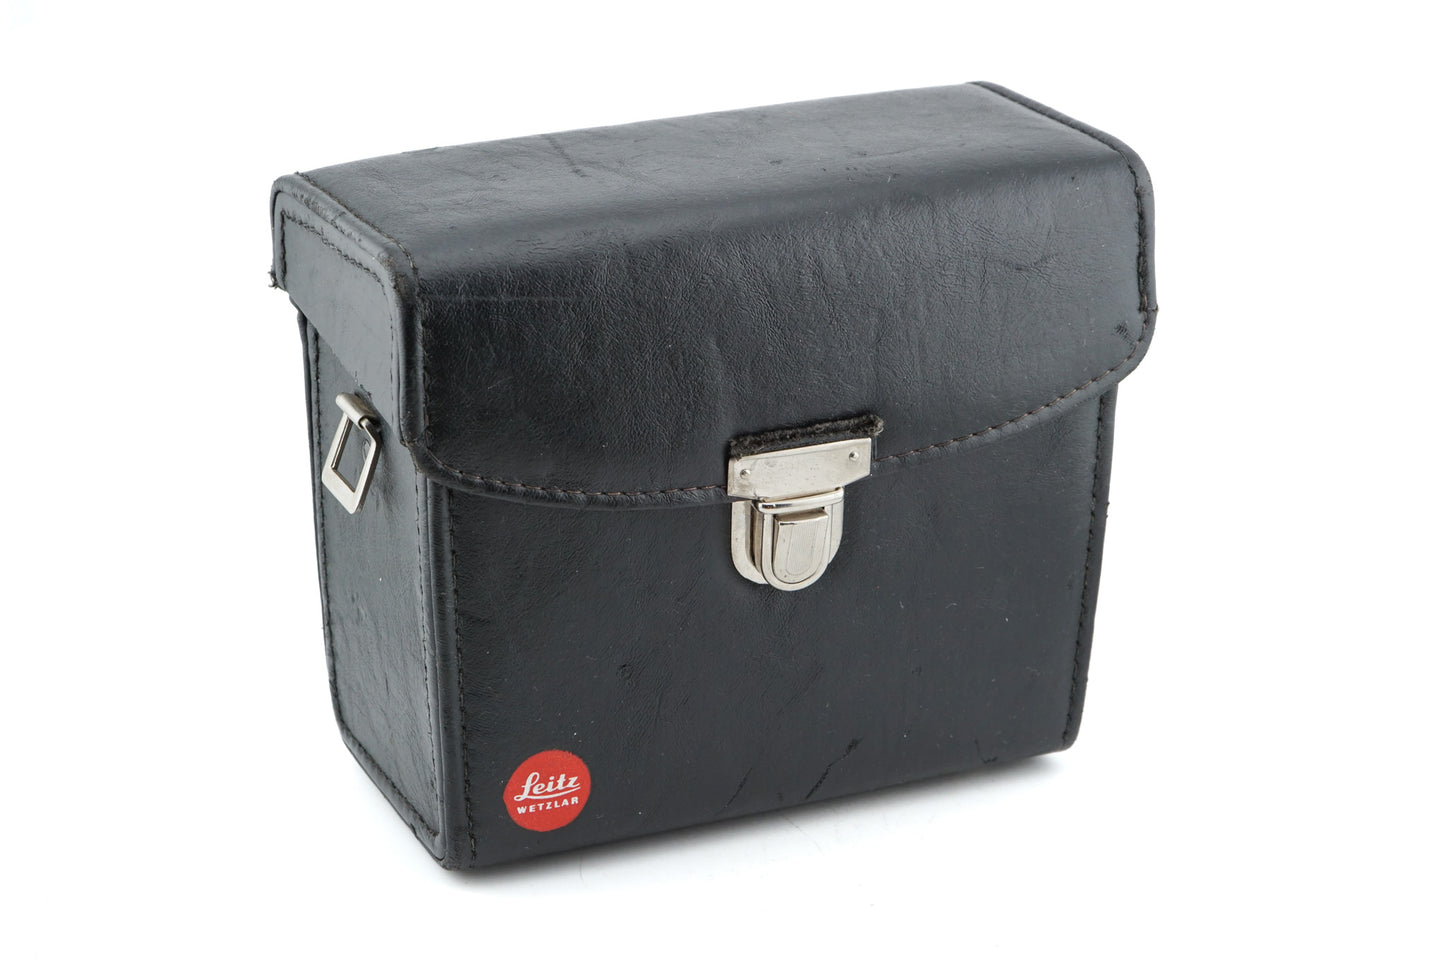 Leica CL Universal Leather Bag - Accessory